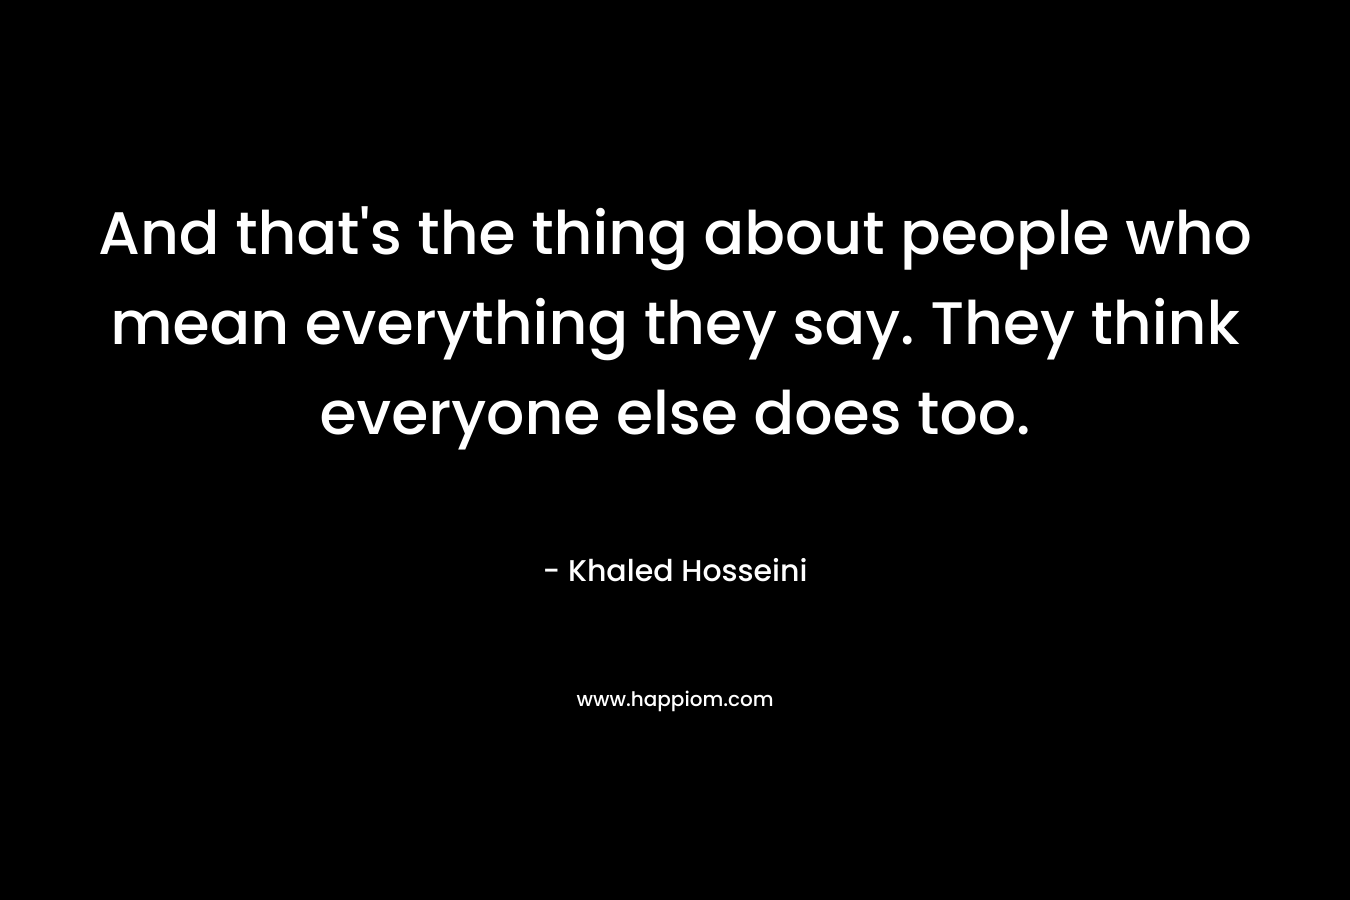 And that’s the thing about people who mean everything they say. They think everyone else does too. – Khaled Hosseini